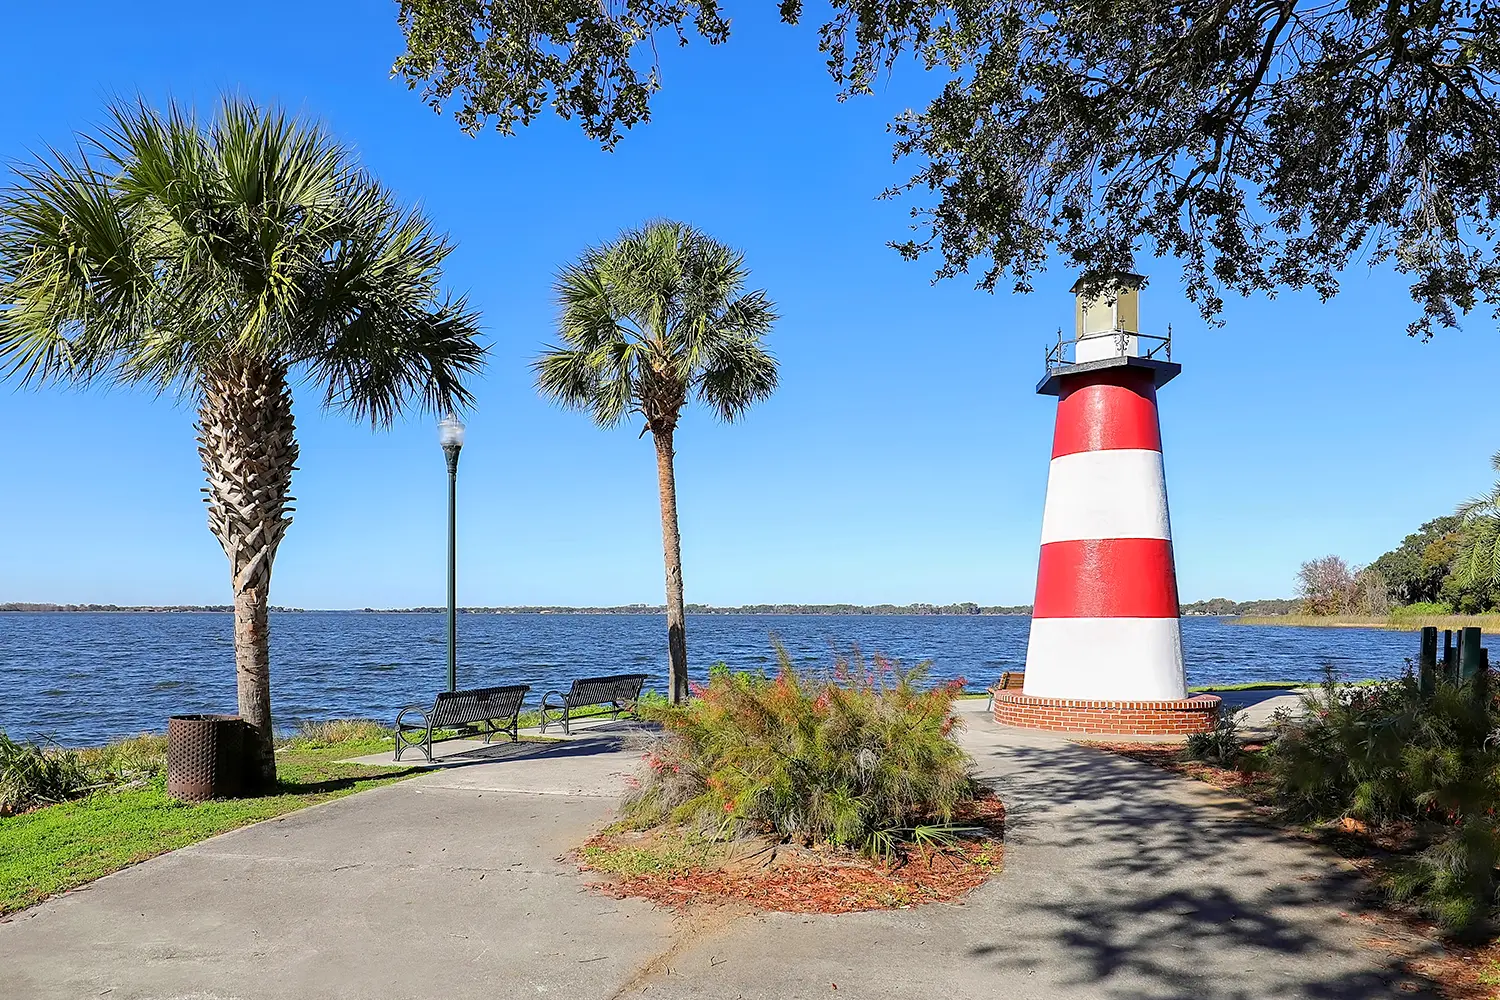 Lighthouse located at the Port of Mount Dora in Grantham Point Park, Florida